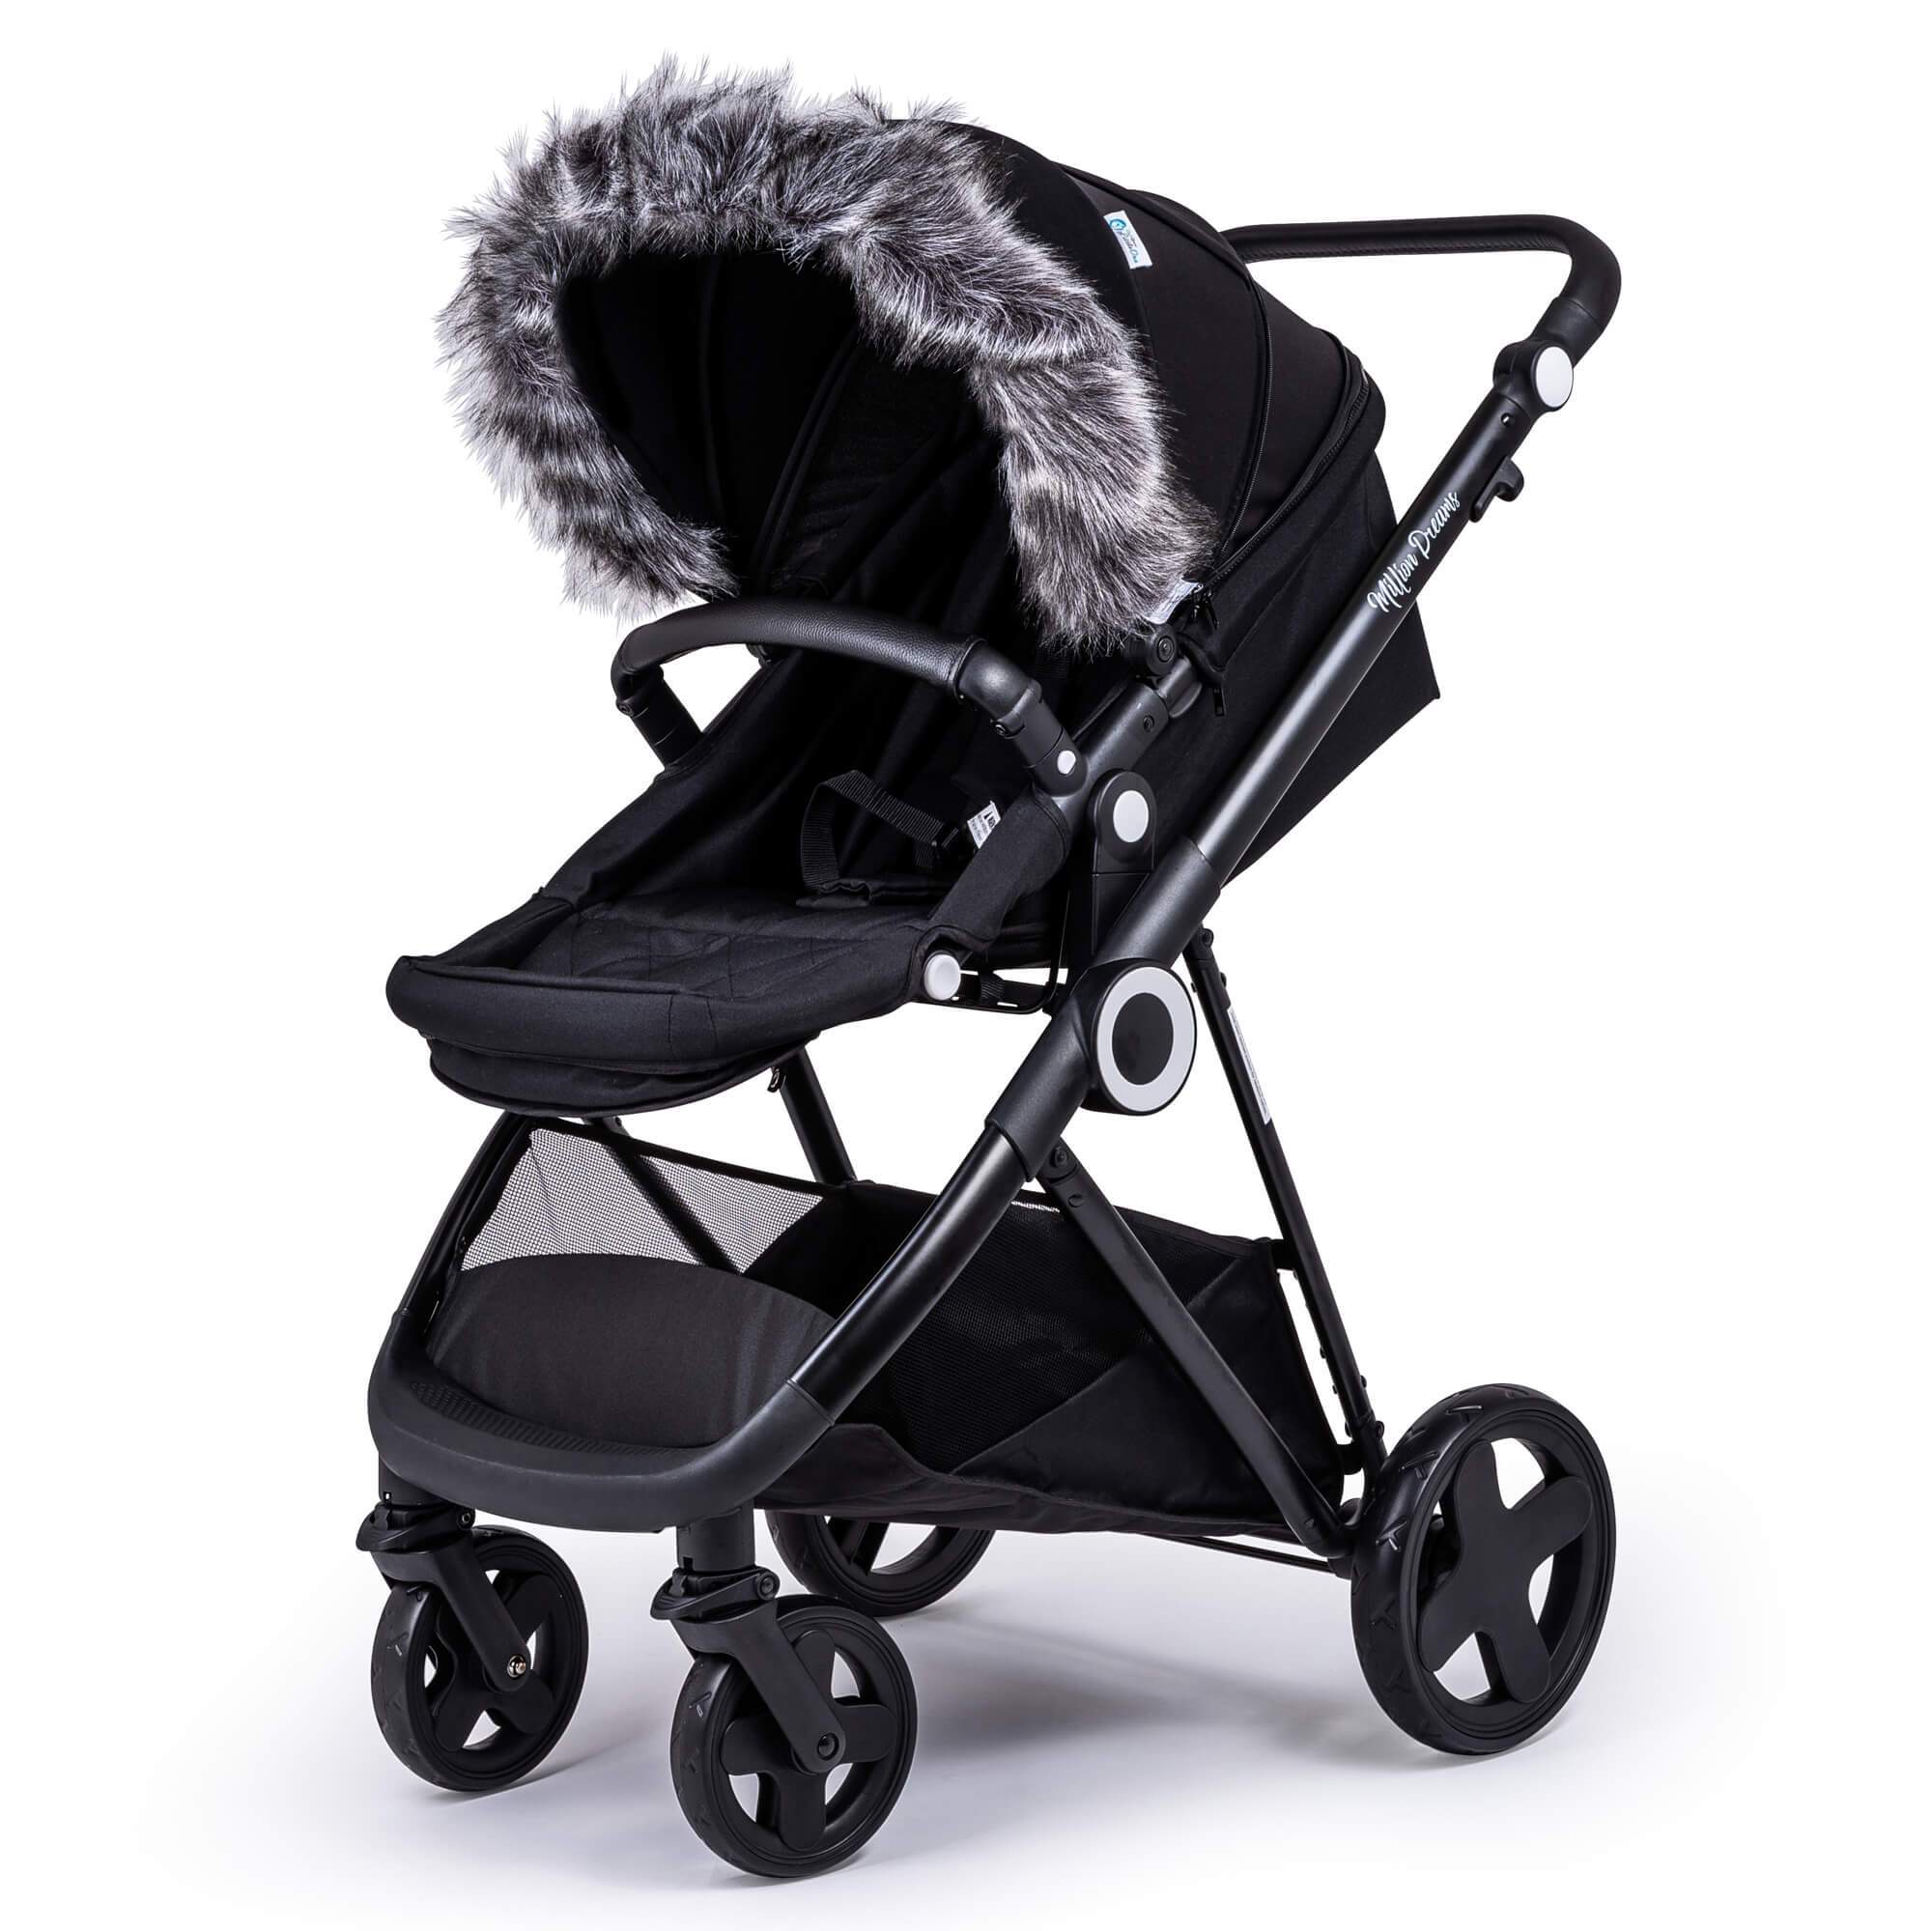 Pram Fur Hood Trim Attachment for Pushchair Compatible with Bugaboo - Dark Grey / Fits All Models | For Your Little One